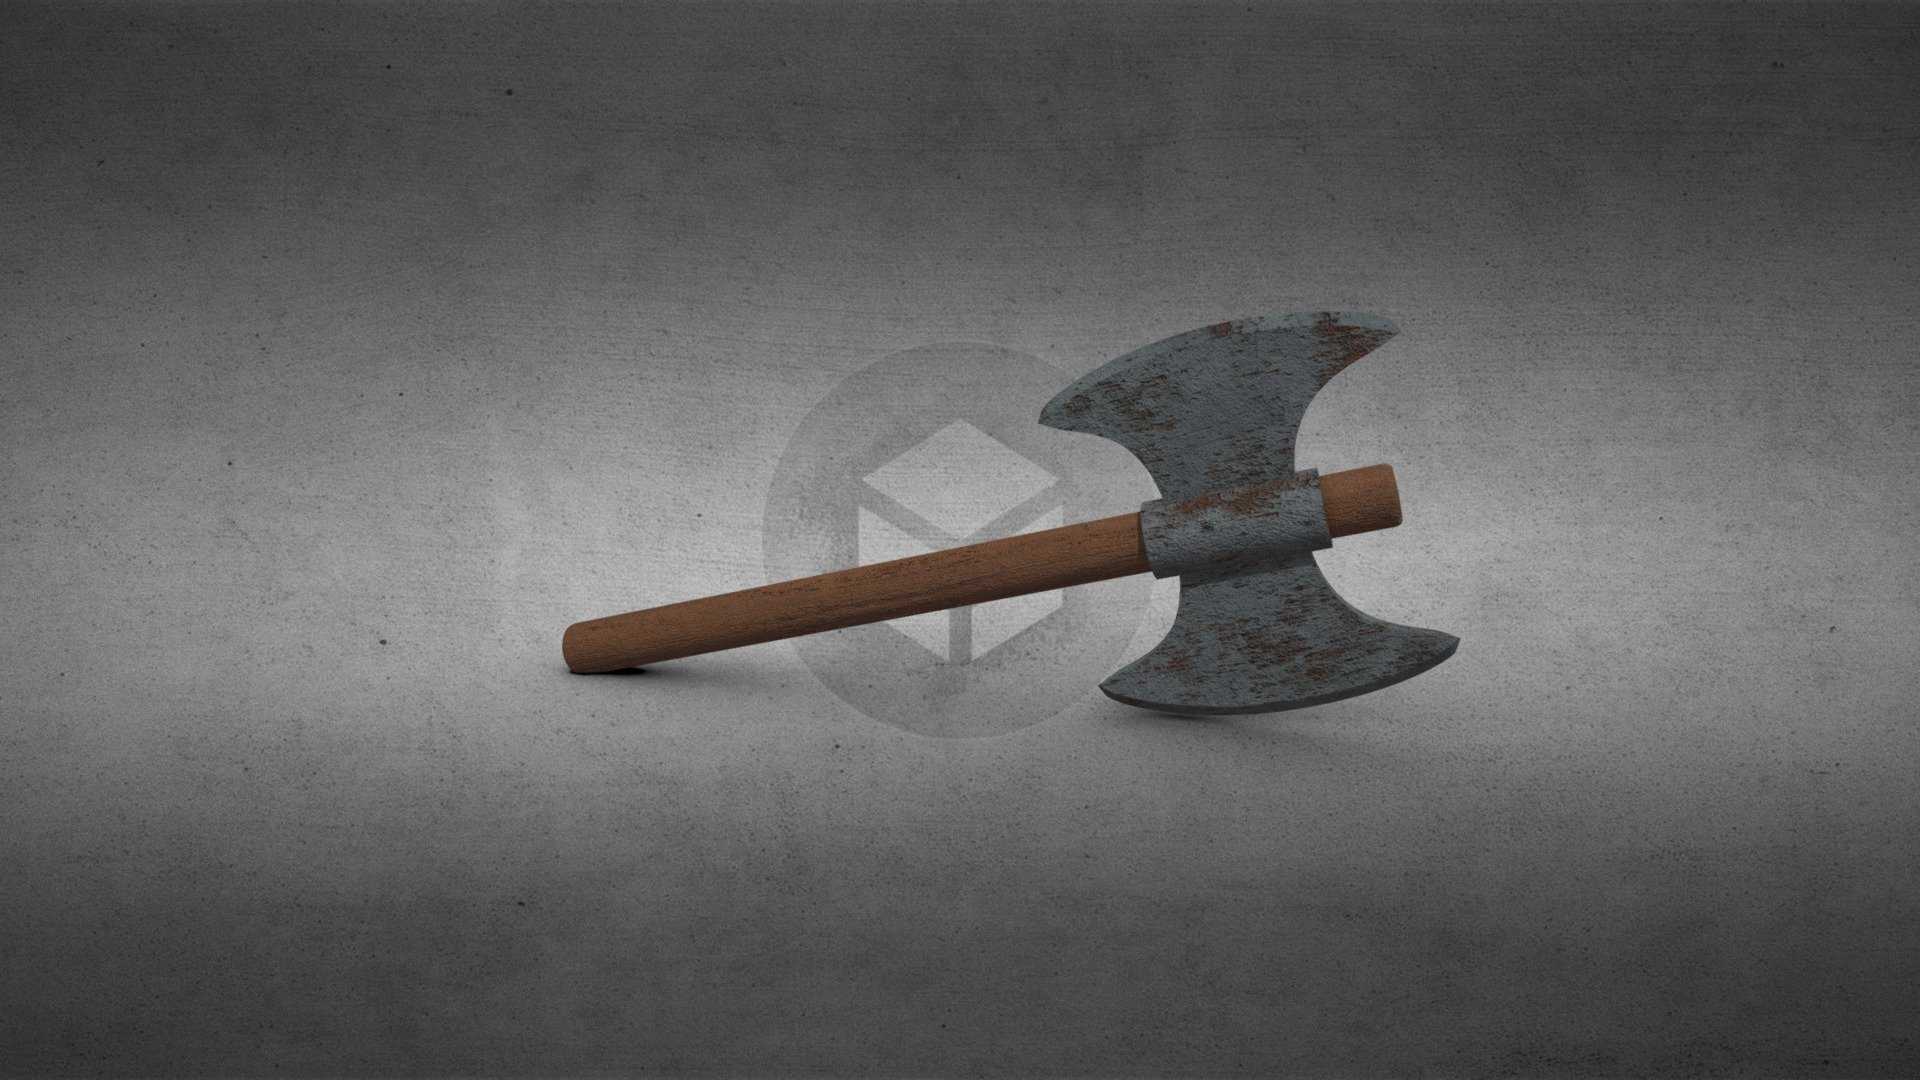 A combat axe designed for use in RPG's, FPS's and various other game genres. Comes with .fbx and .blend files, albedo textures and normal maps.

Contains assets from ambientCG.com, licensed under CC0 1.0 Universal 3d model